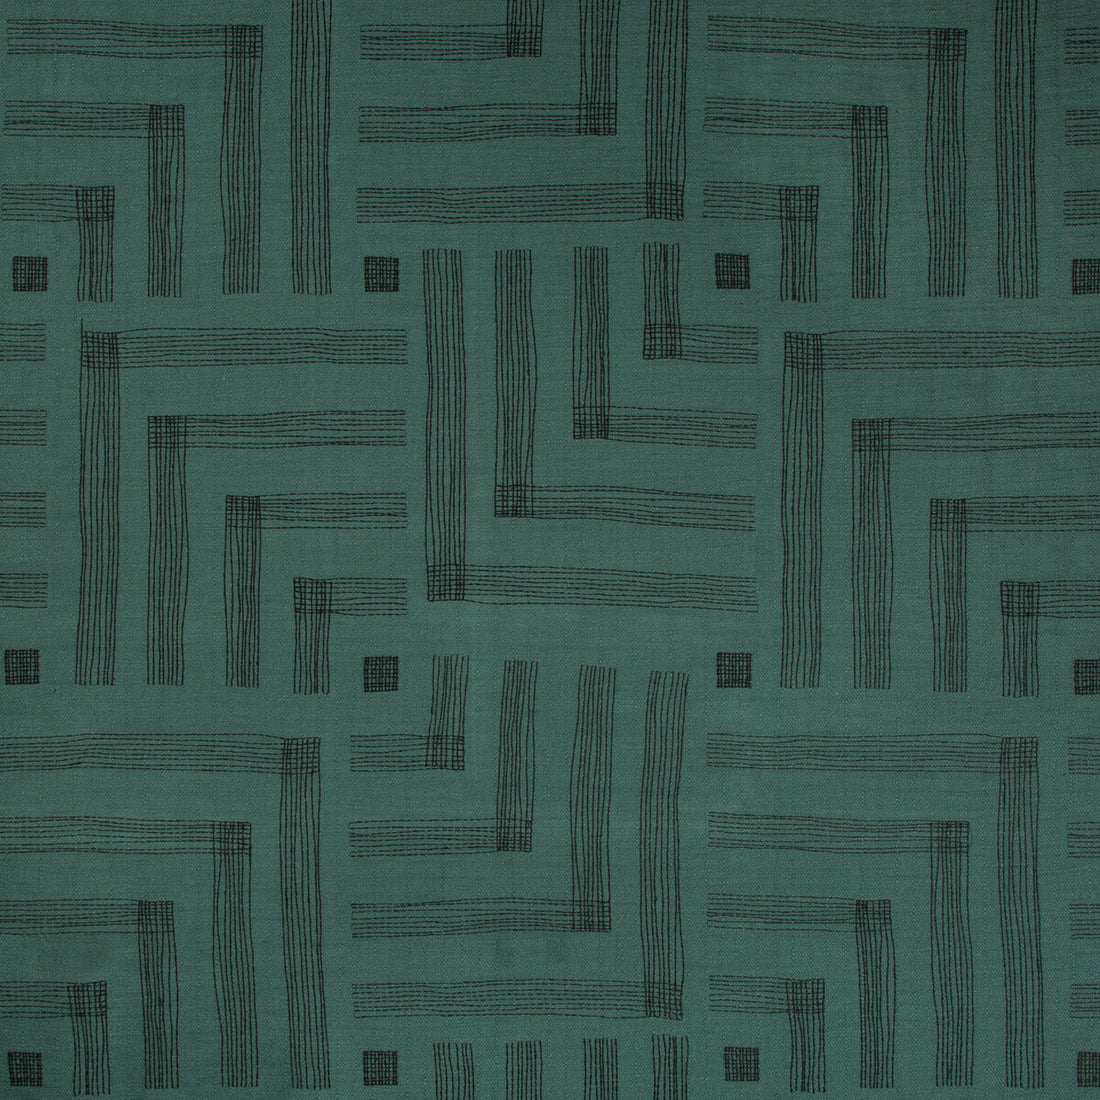 Pastiche fabric in spruce/jet color - pattern GWF-3726.358.0 - by Lee Jofa Modern in the Kelly Wearstler IV collection